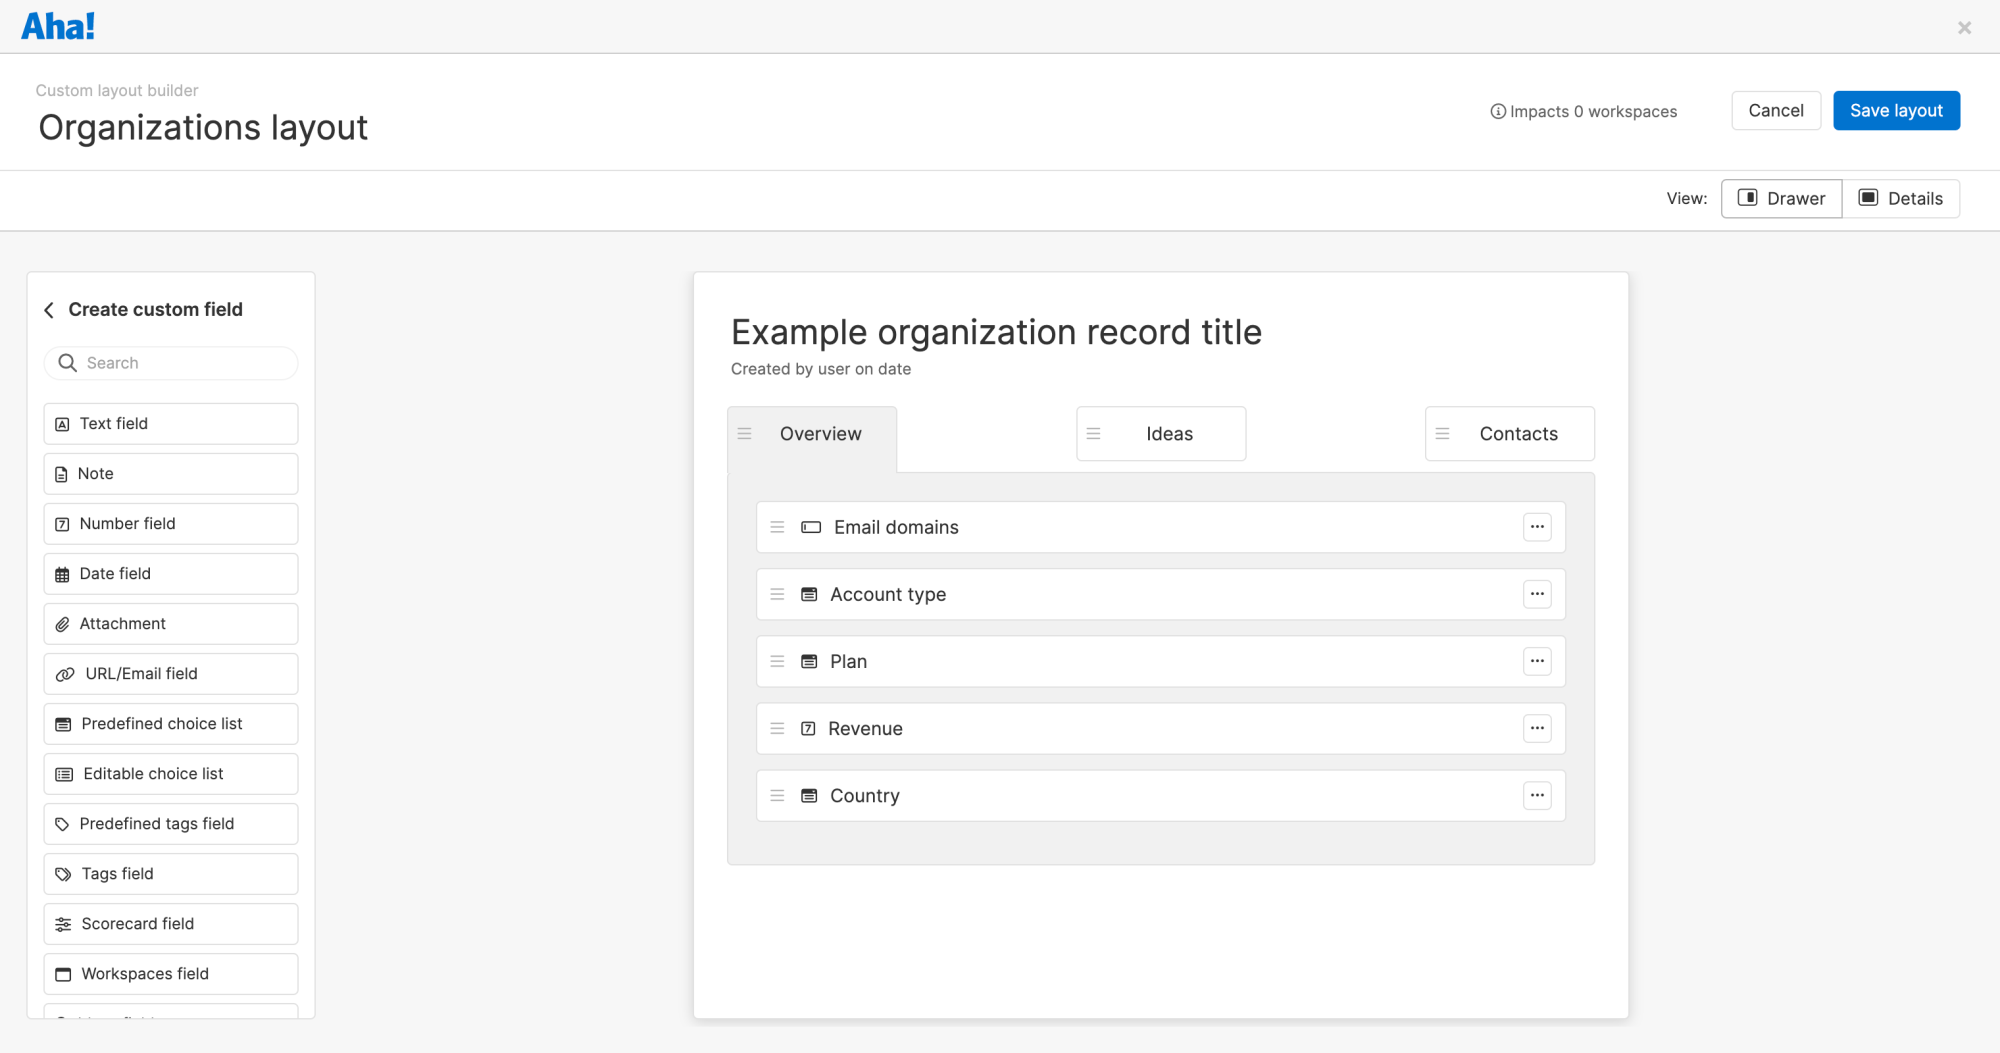 If you already have a custom layout for organizations, update it to include the Integrations field.